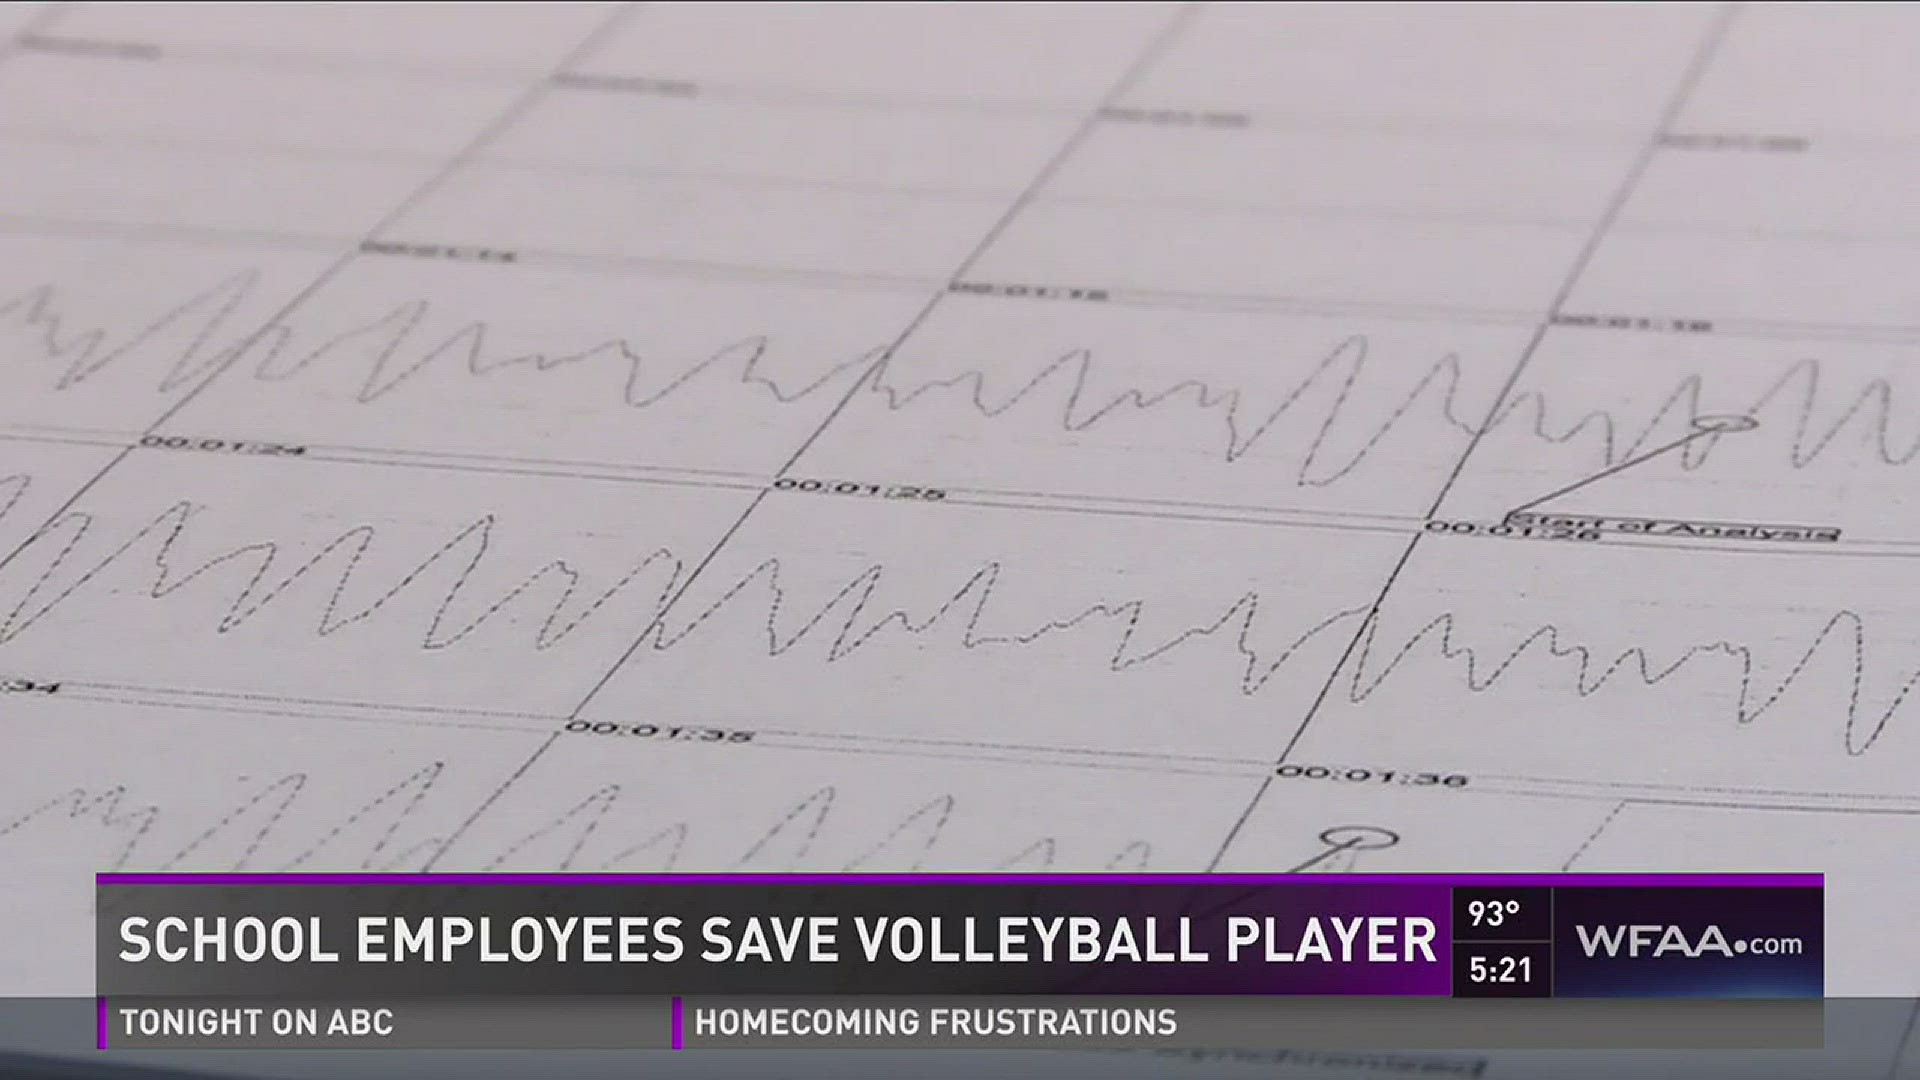 School employees save volleyball player